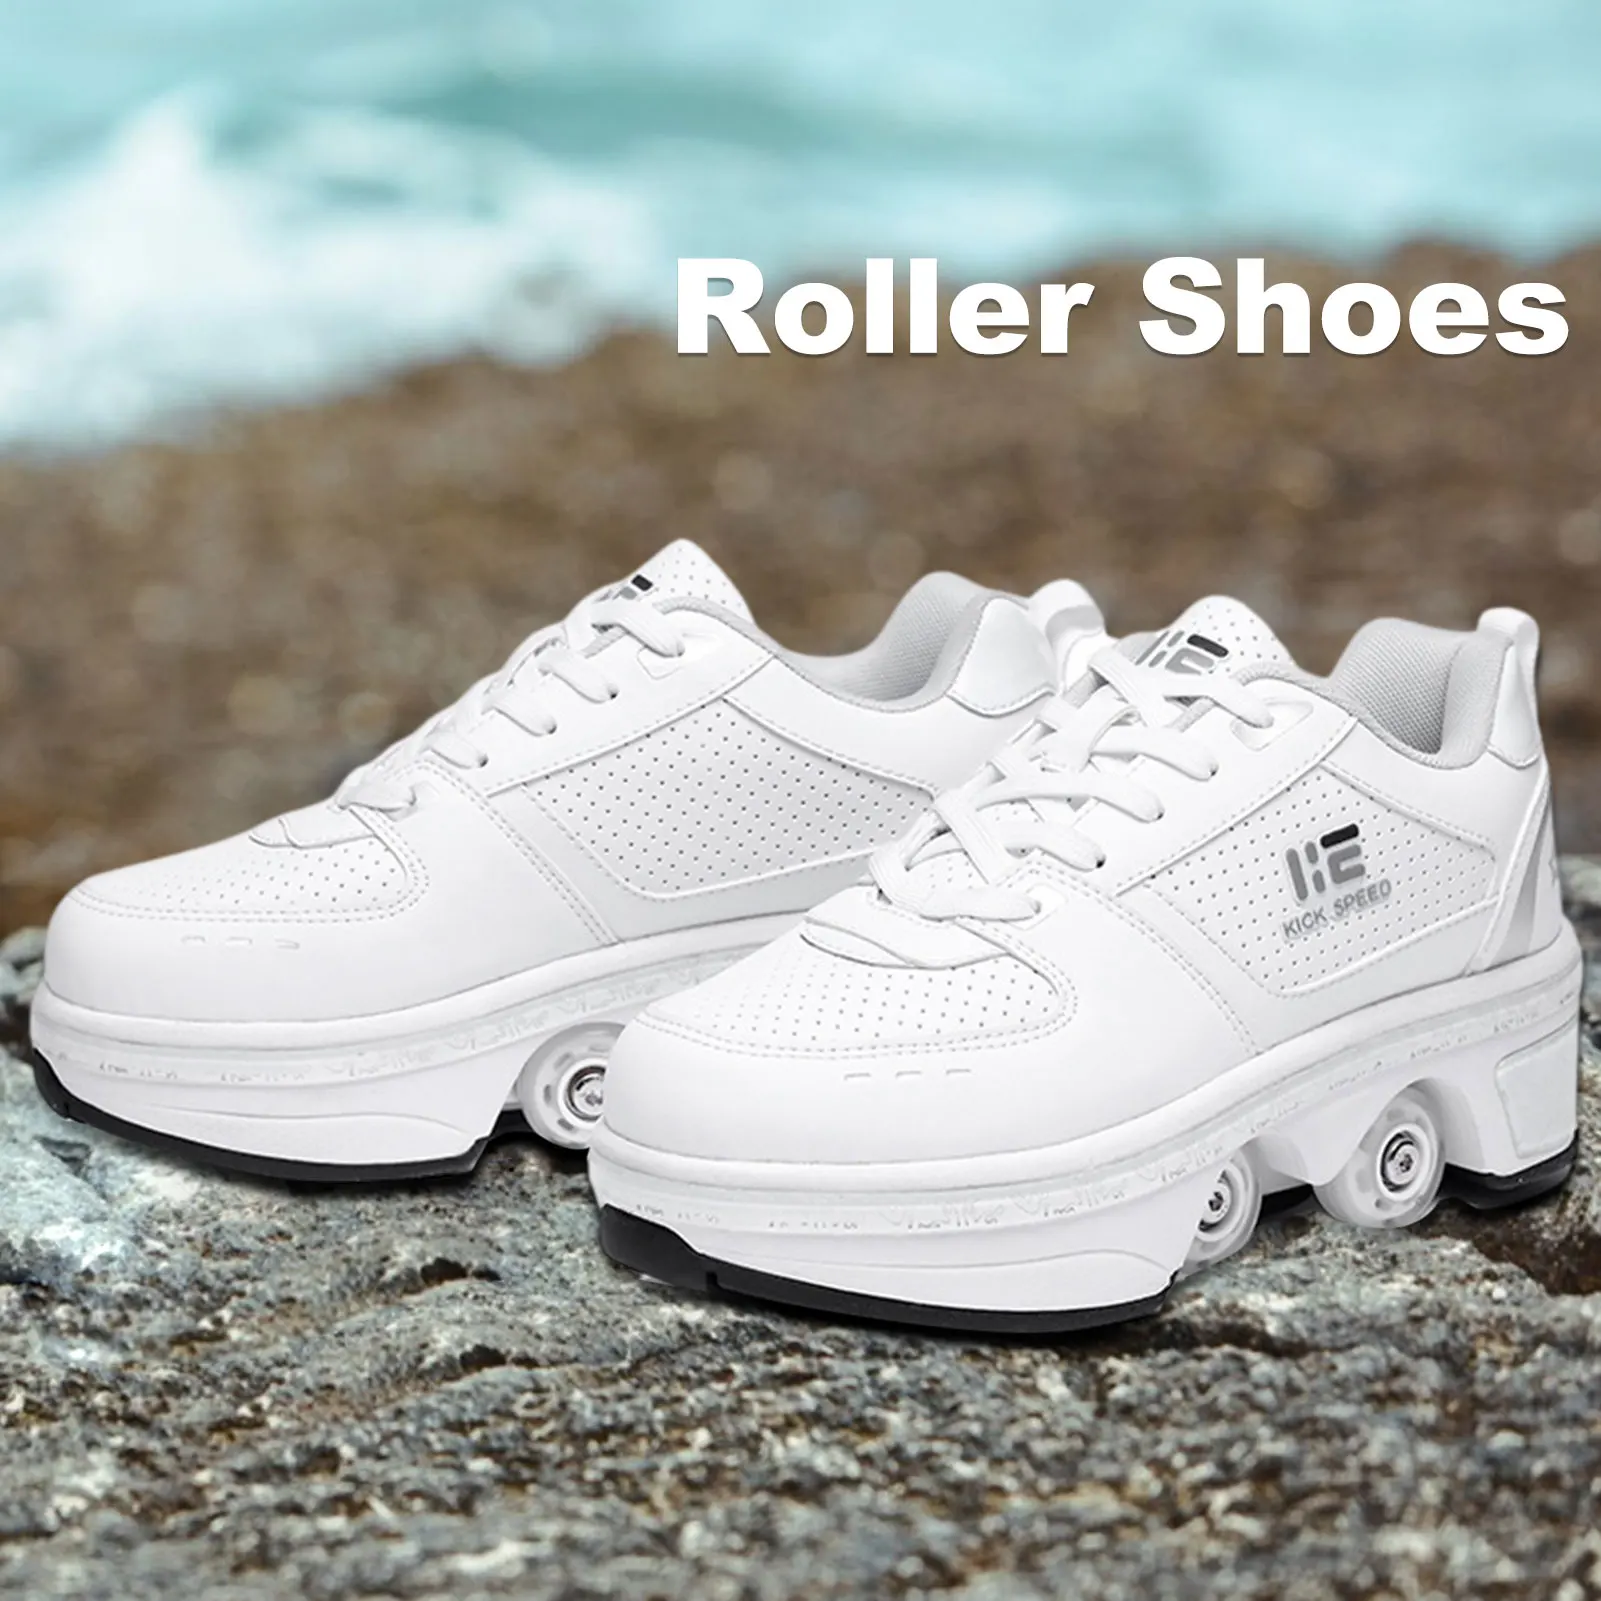 

Outdoor Deformation Skating Shoes Thick Bottom PU Wheel Breathable Invisible Pulley Roller Shoes For Party Adults Children